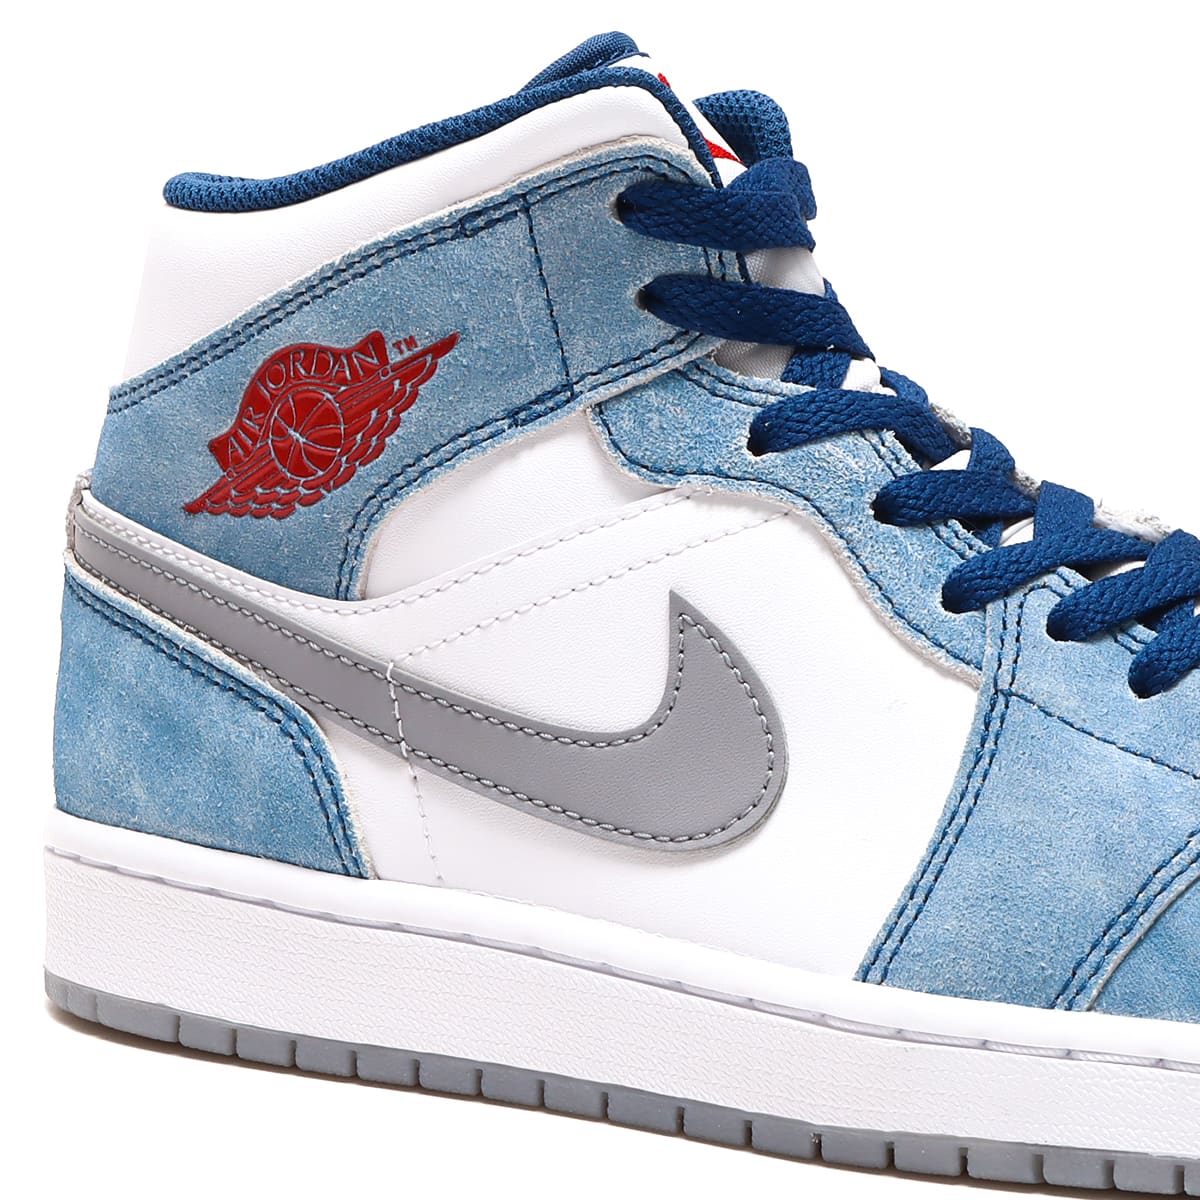 Air Jordan 1 Mid "French Blue Fire Red"